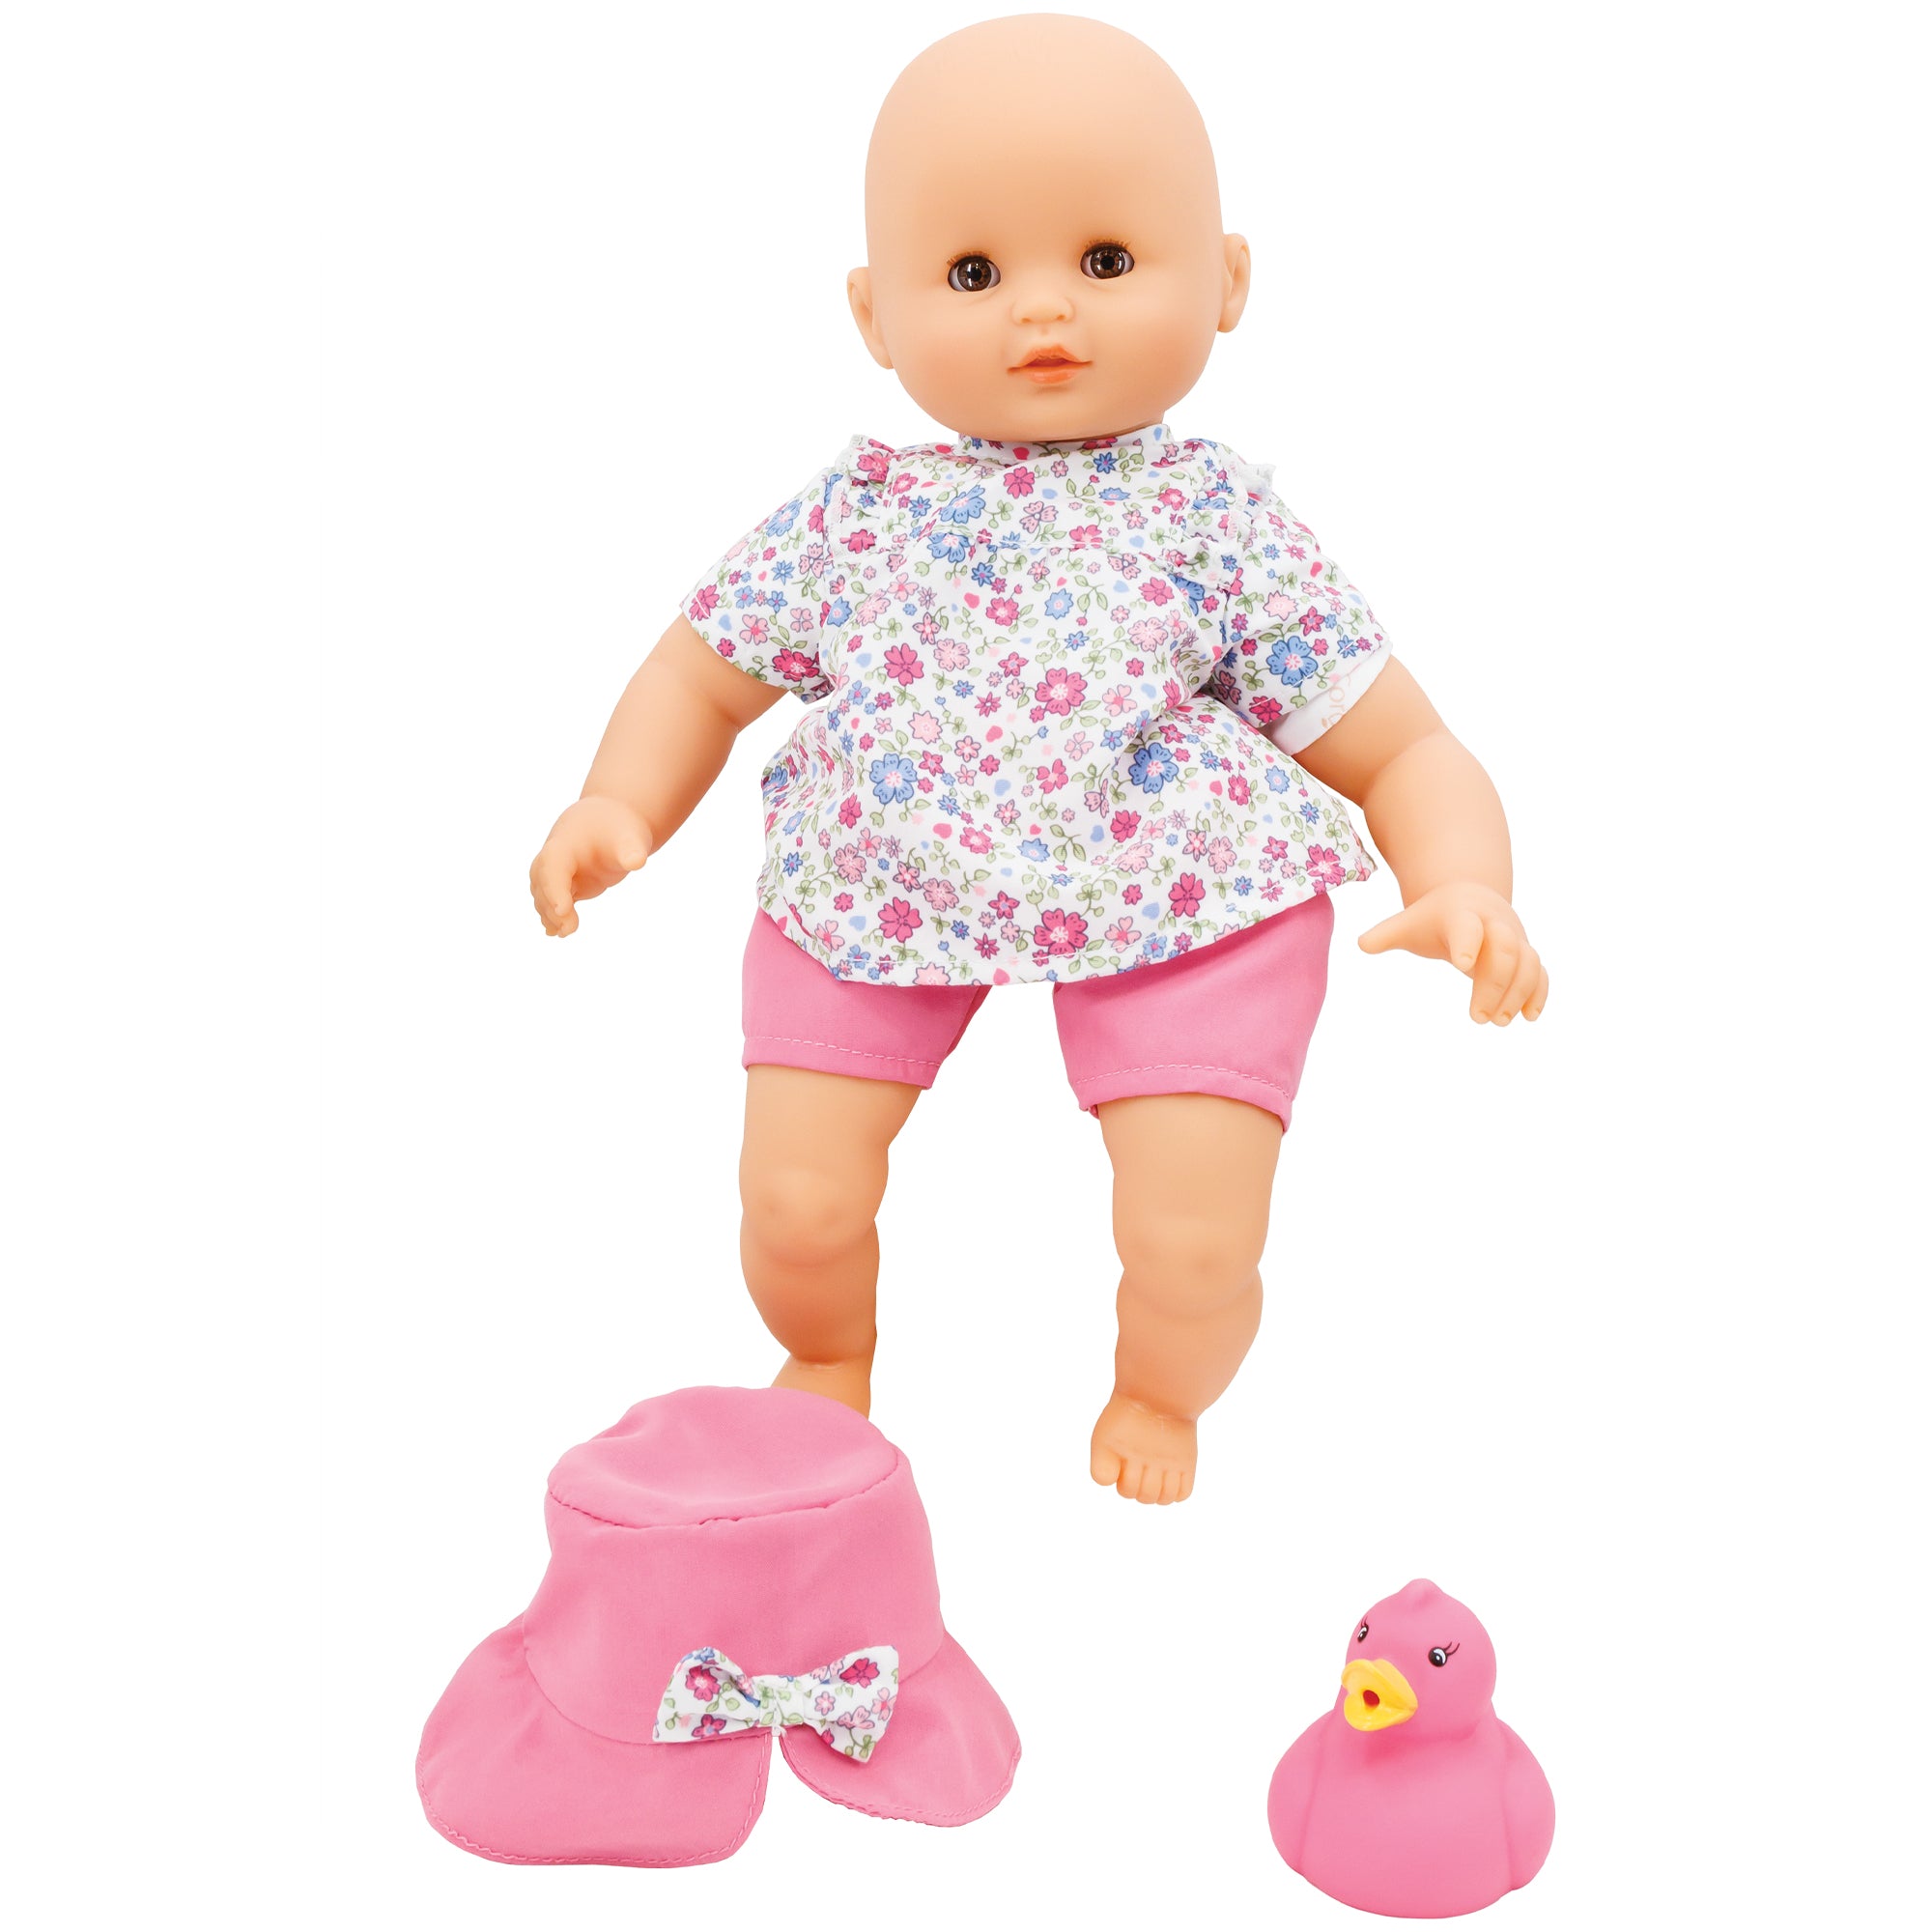 Corolle’s Bebe Coralie. The light skinned baby doll has brown blinkable eyes and is standing. She is wearing pink shorts and a floral shirt with a variety of pinks and periwinkle colored flowers in different sizes. In front, and to the left of the baby, is a pink hat with a bow in the middle that matches the shirt print. To the right of the hat is a pink rubber ducky.